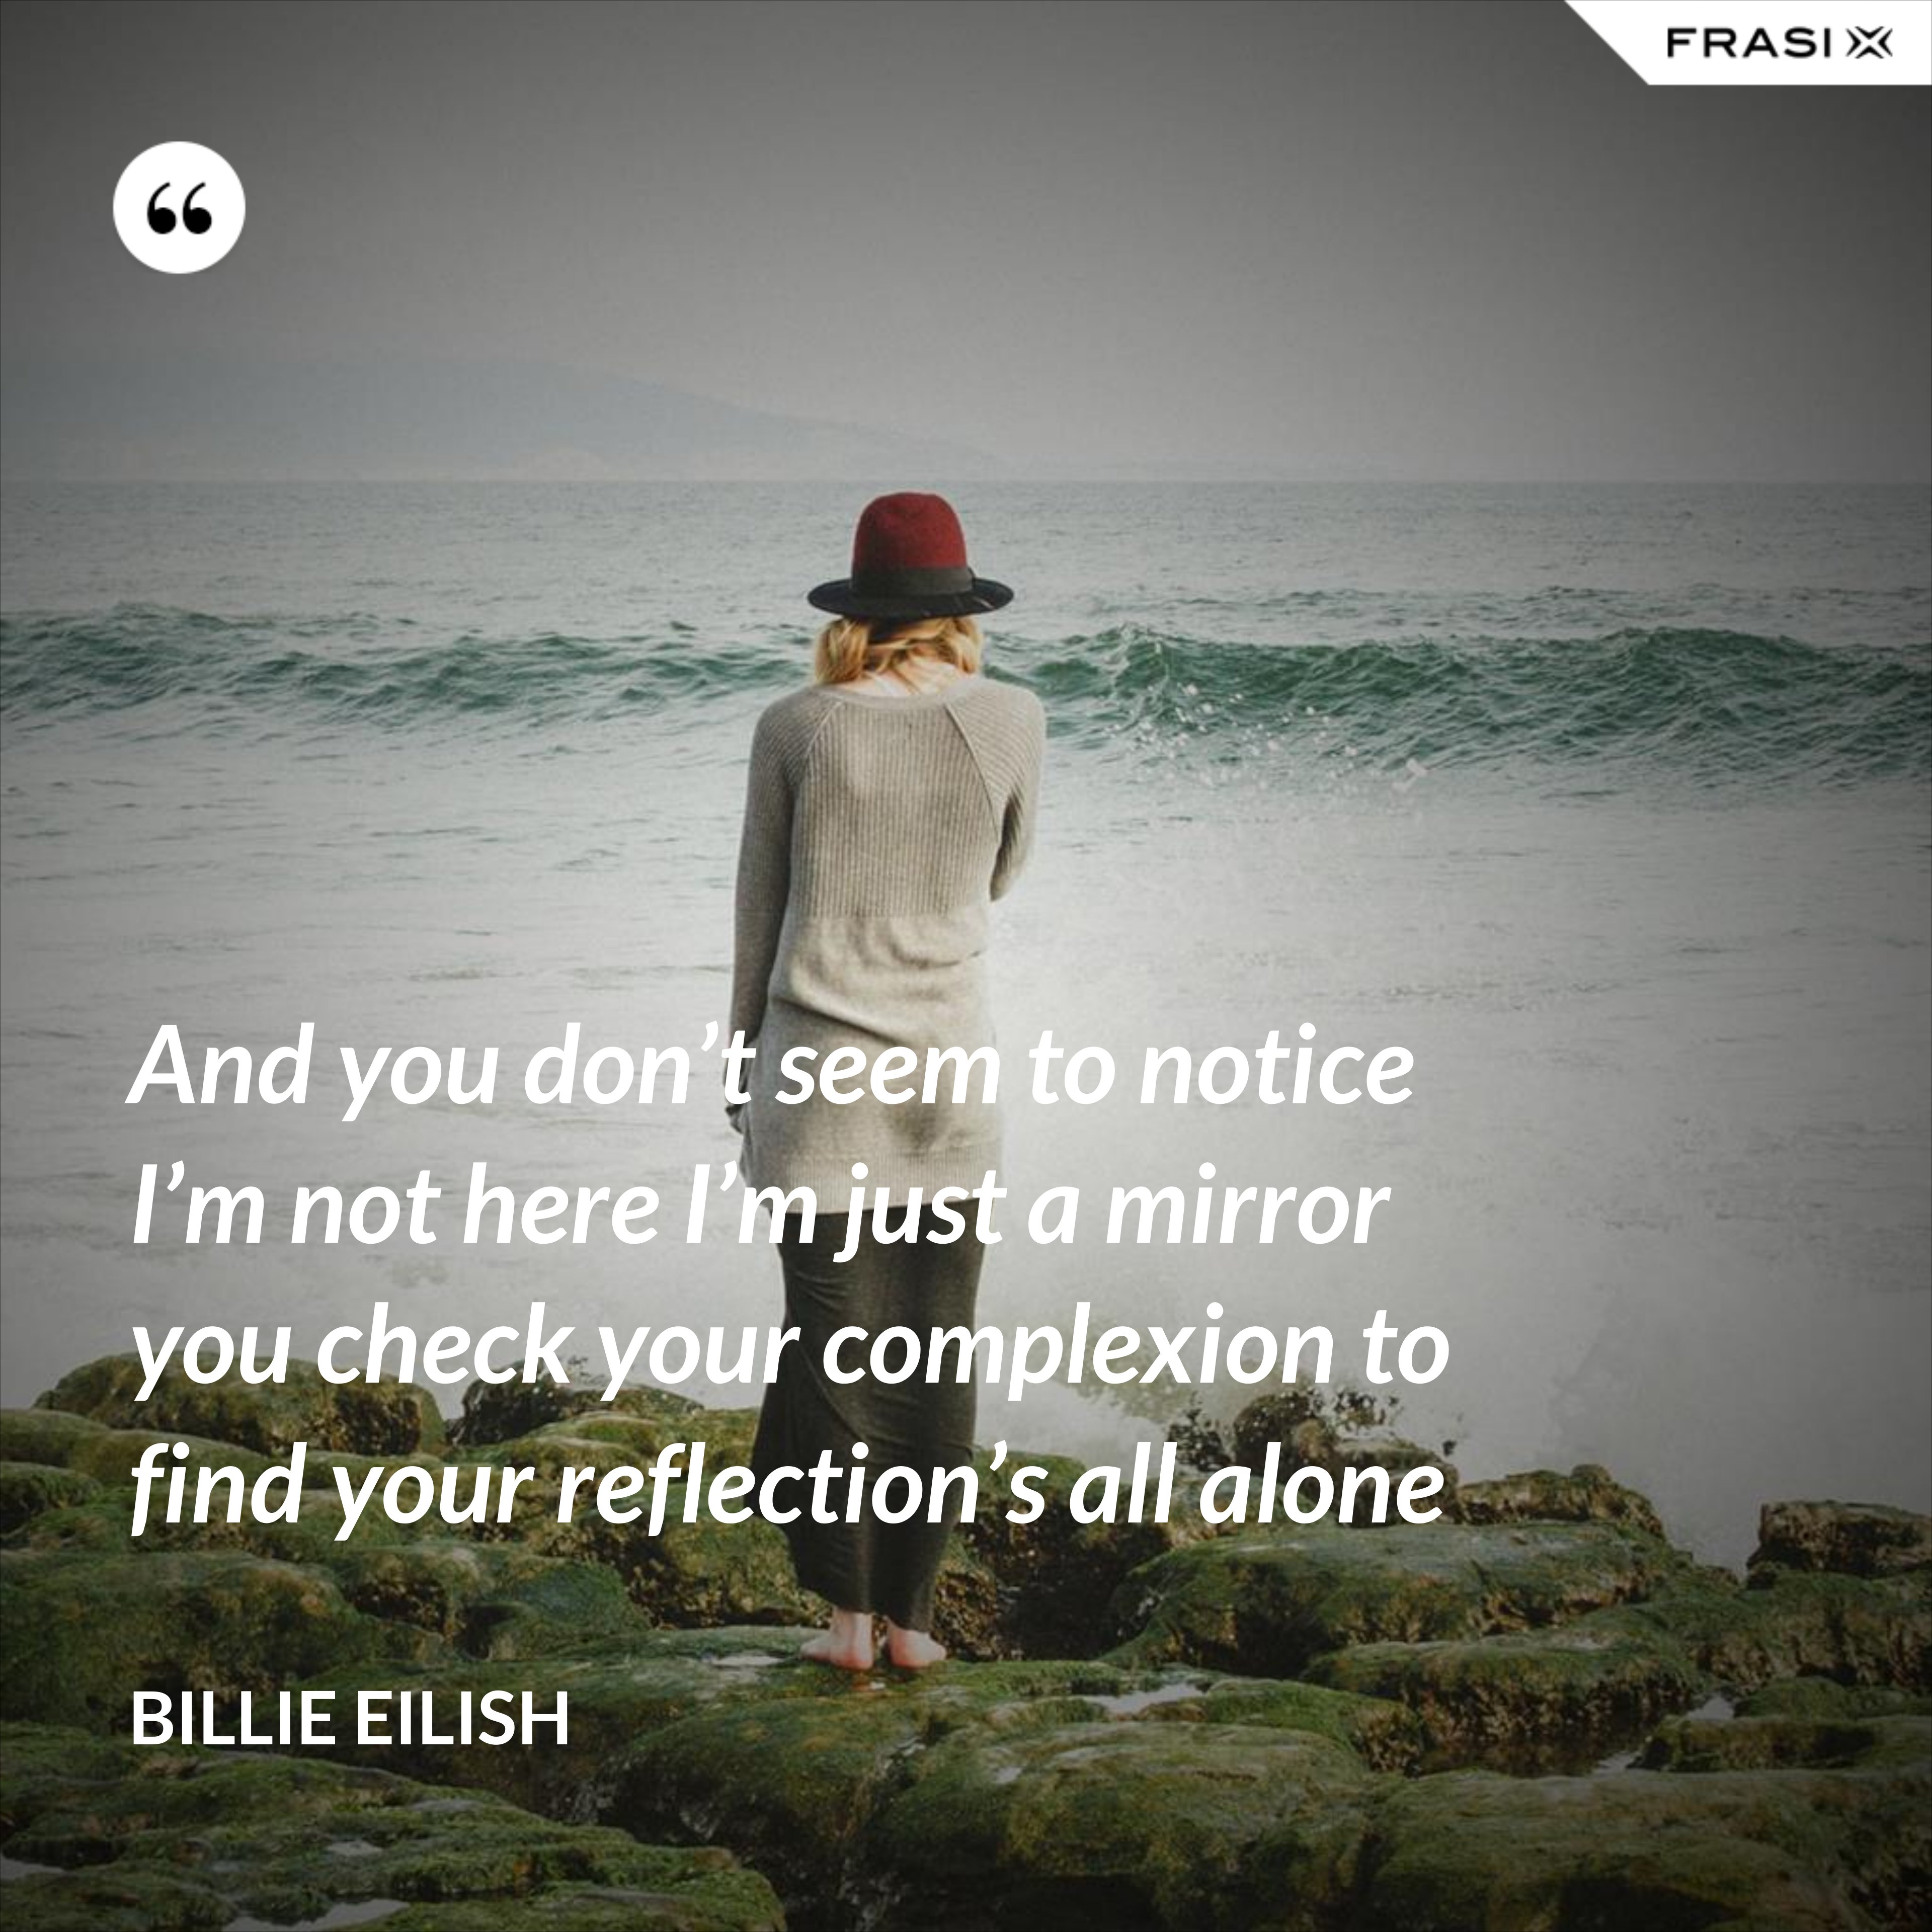 And you don’t seem to notice I’m not here I’m just a mirror you check your complexion to find your reflection’s all alone - Billie Eilish